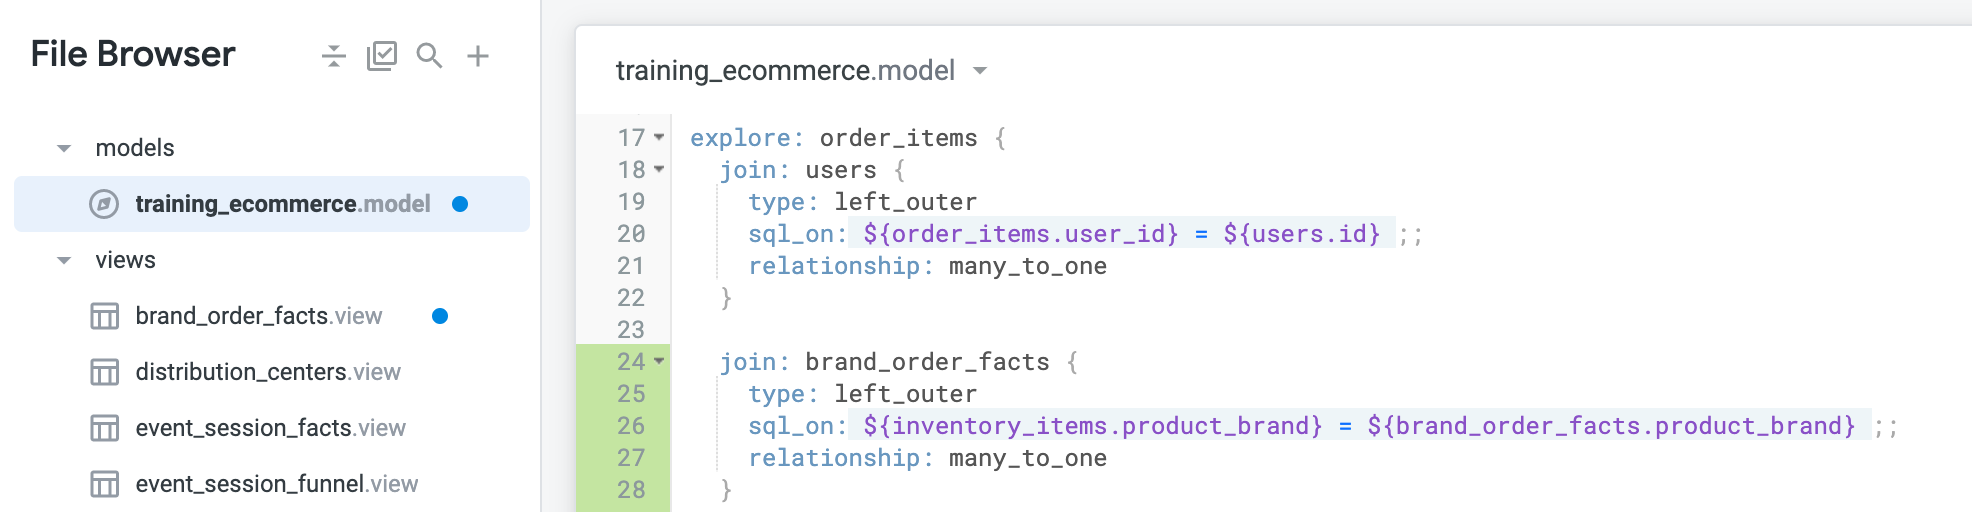 File browser page showing training_ecommerce.model code